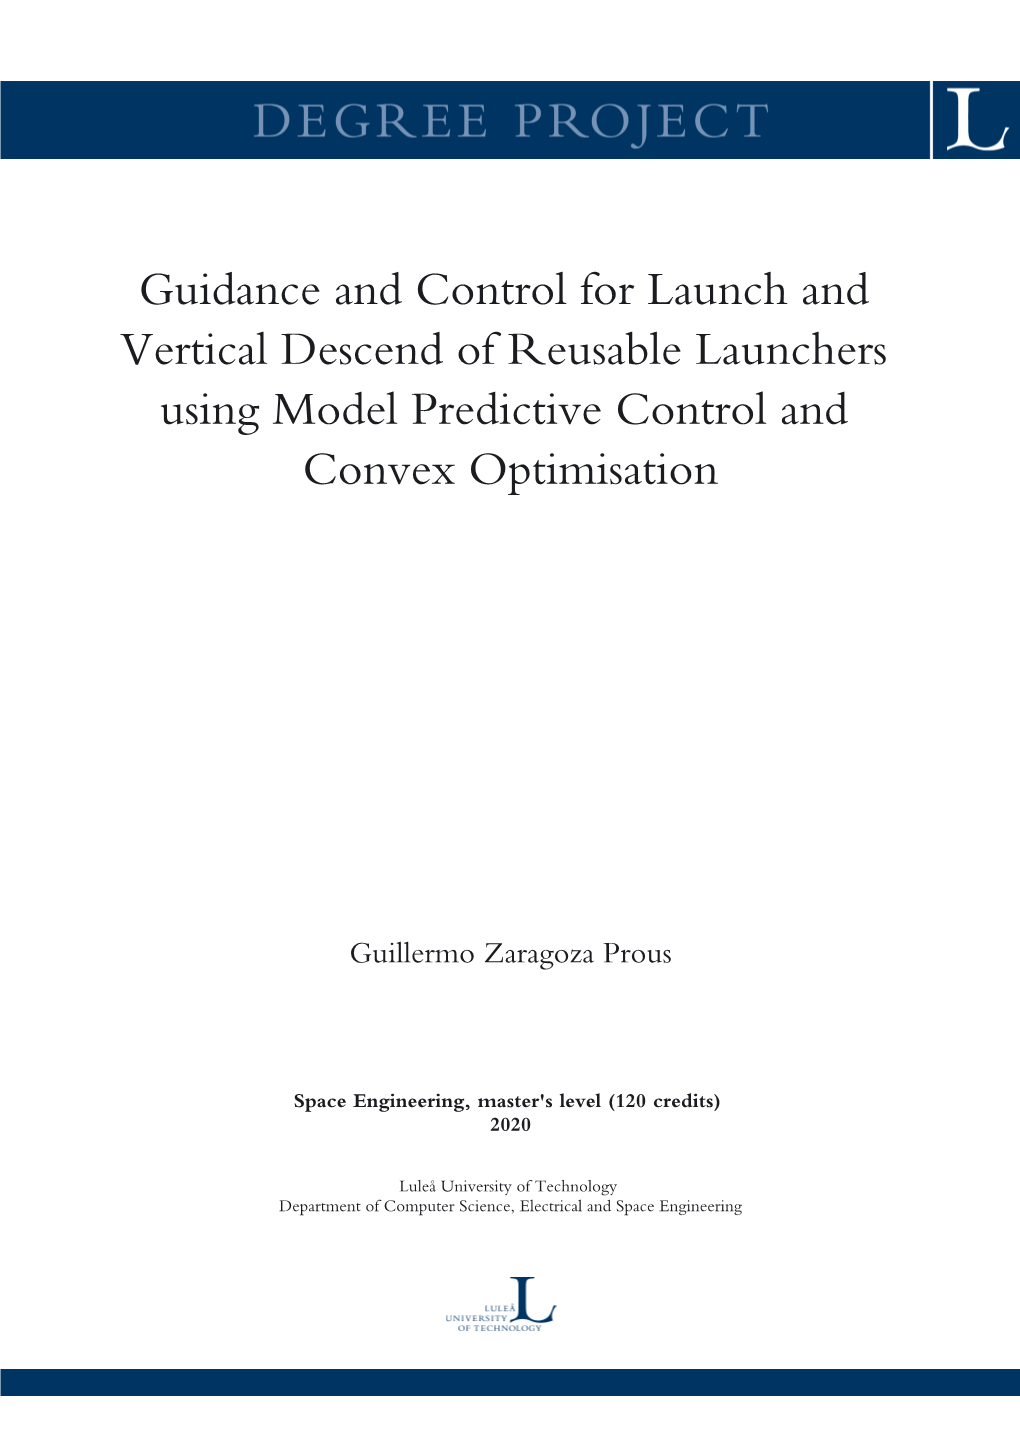 Guidance and Control for Launch and Vertical Descend of Reusable Launchers Using Model Predictive Control and Convex Optimisation